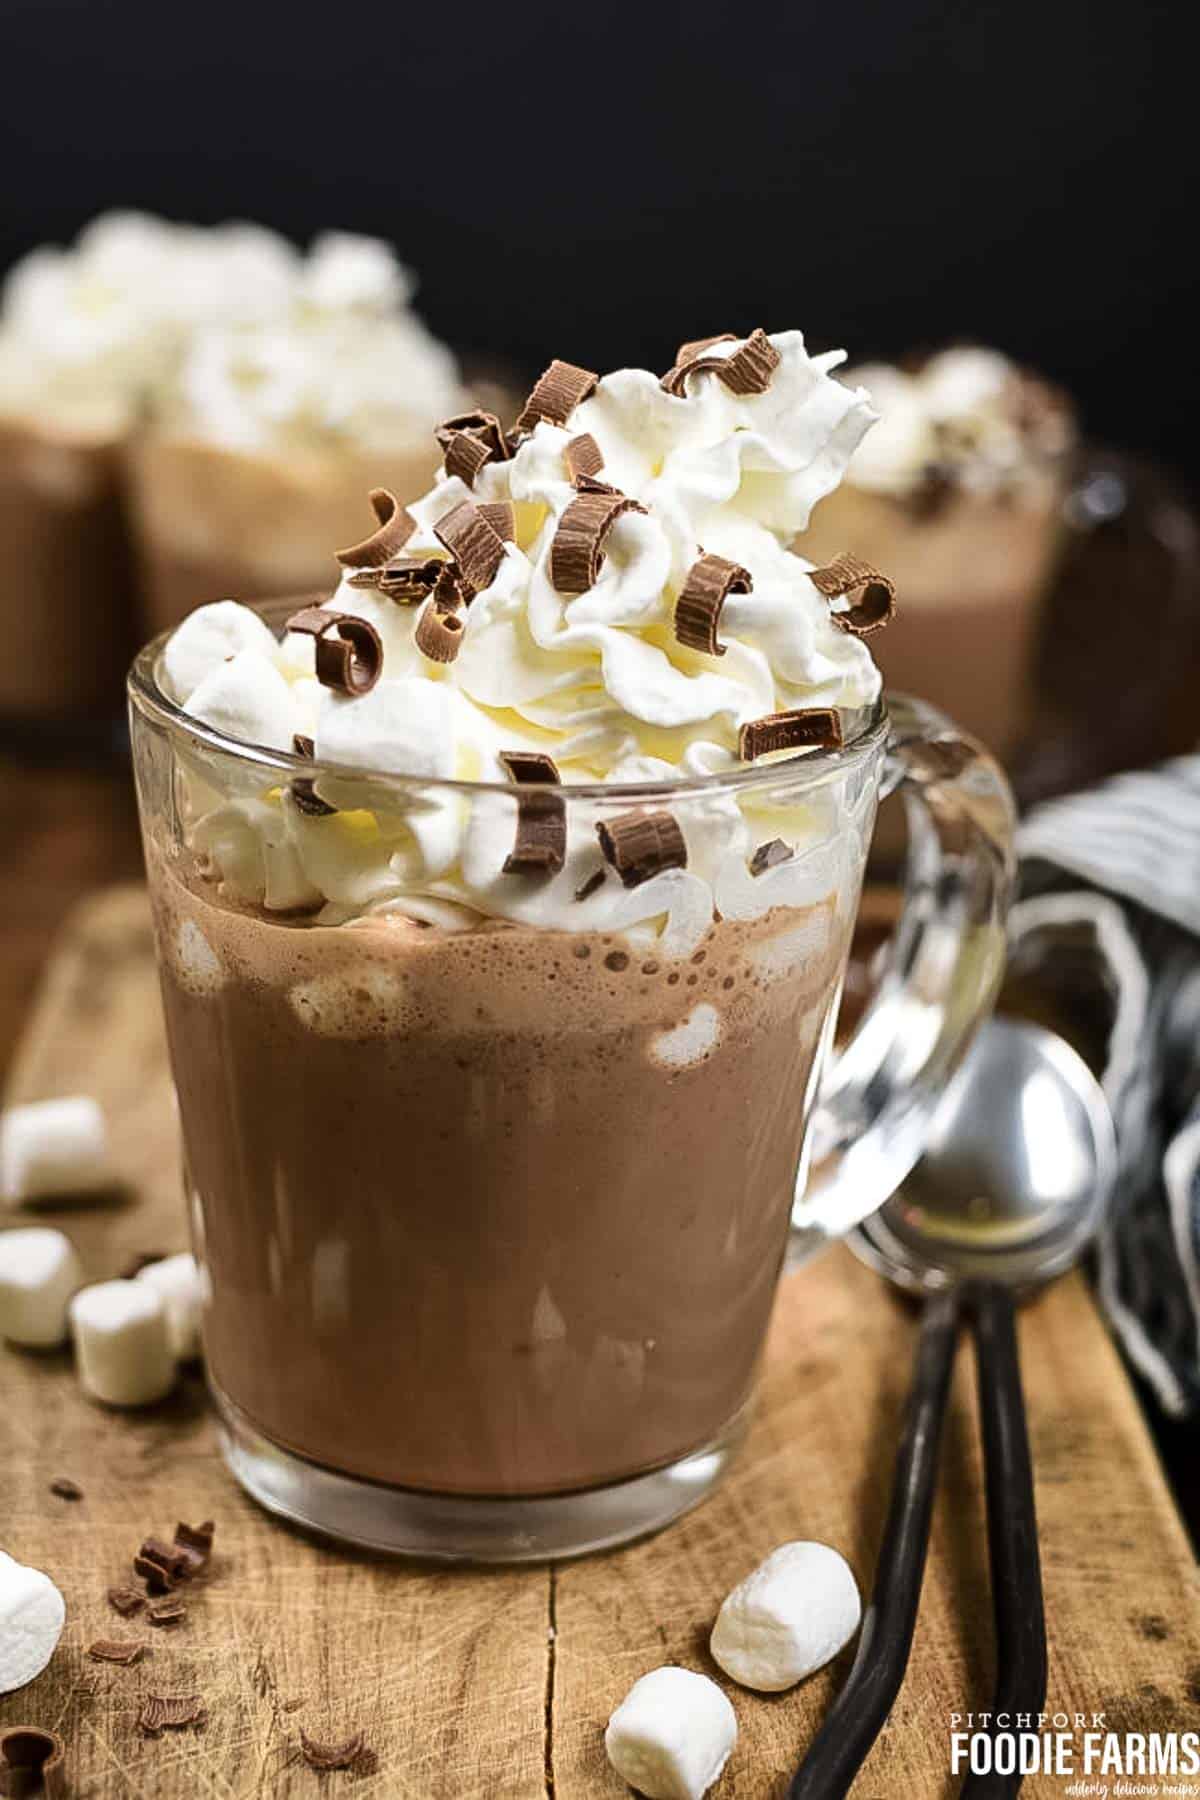 A glass mug of hot chocolate with whipped cream and chocolate chips on top.